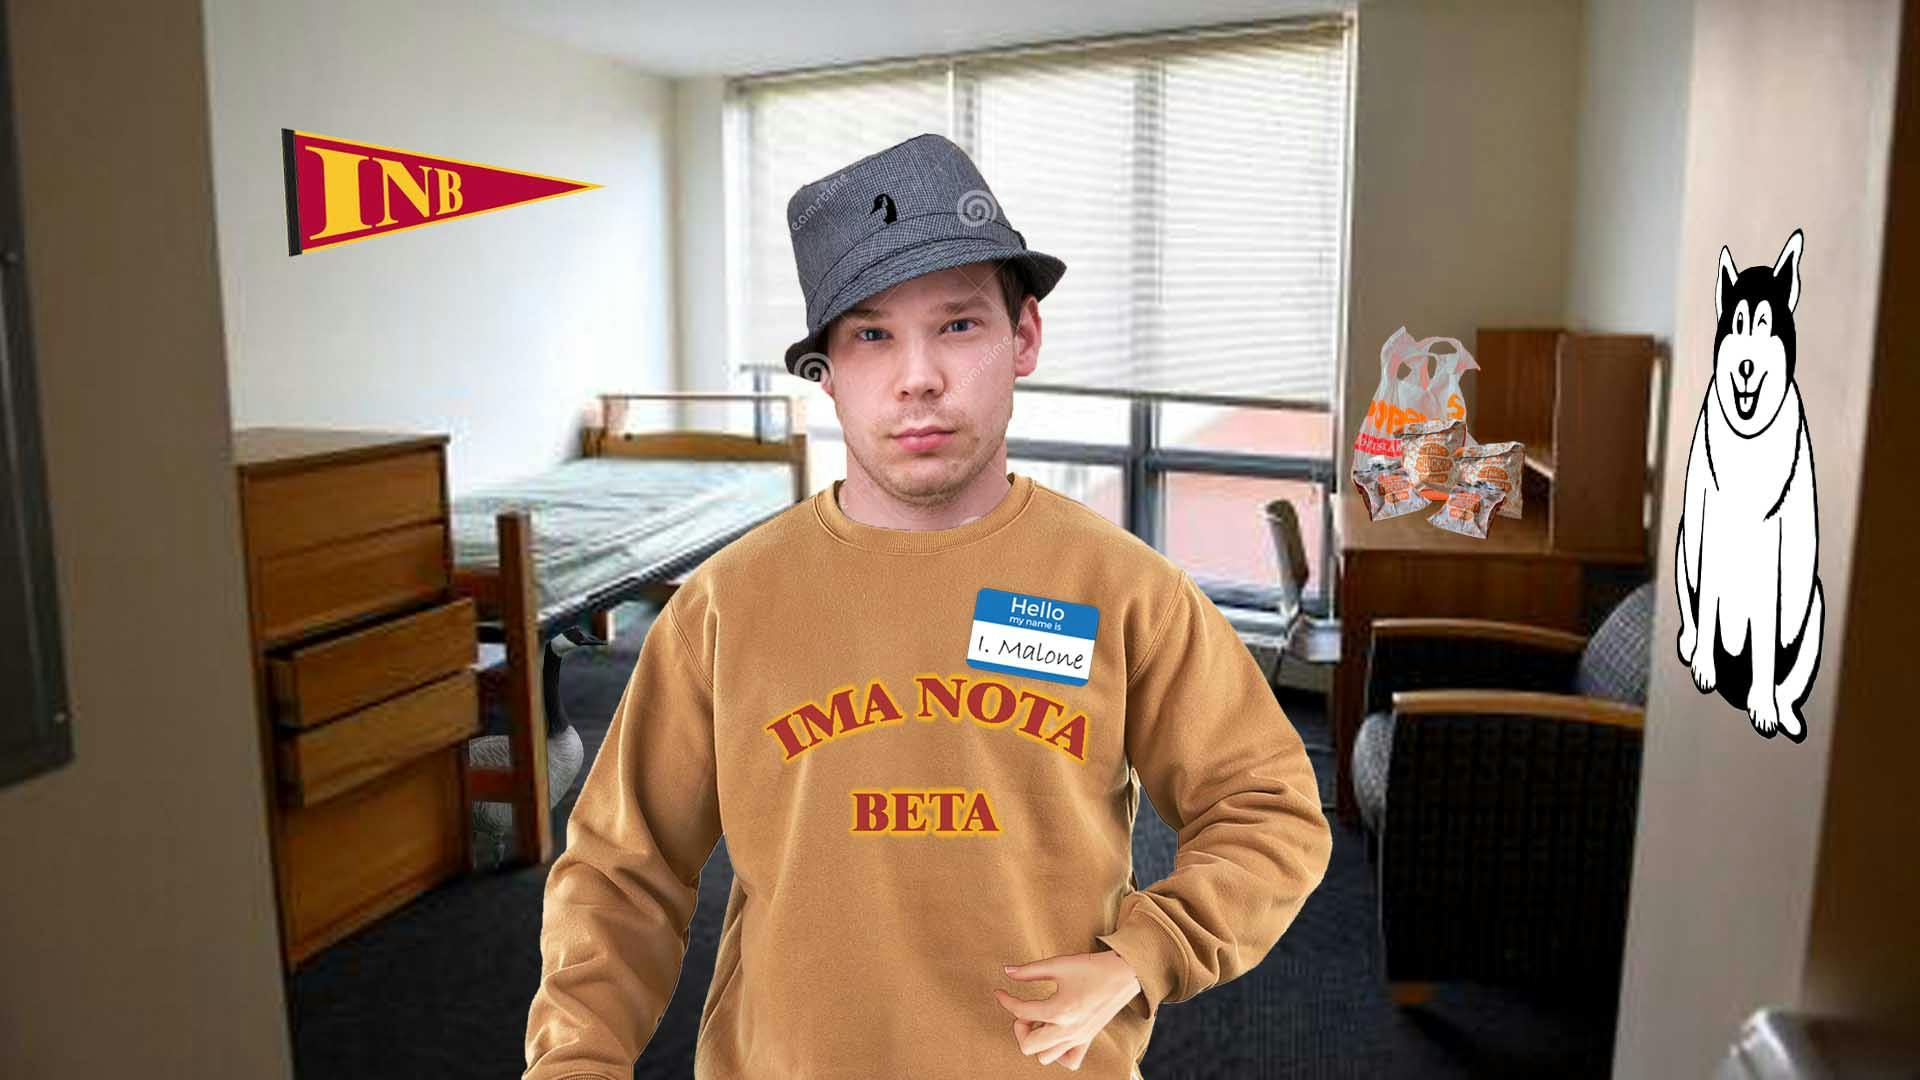 Thumbnail for Student Threatens a Discrimination Lawsuit Against Sorority, Says He "Just Wants to Meet Females"